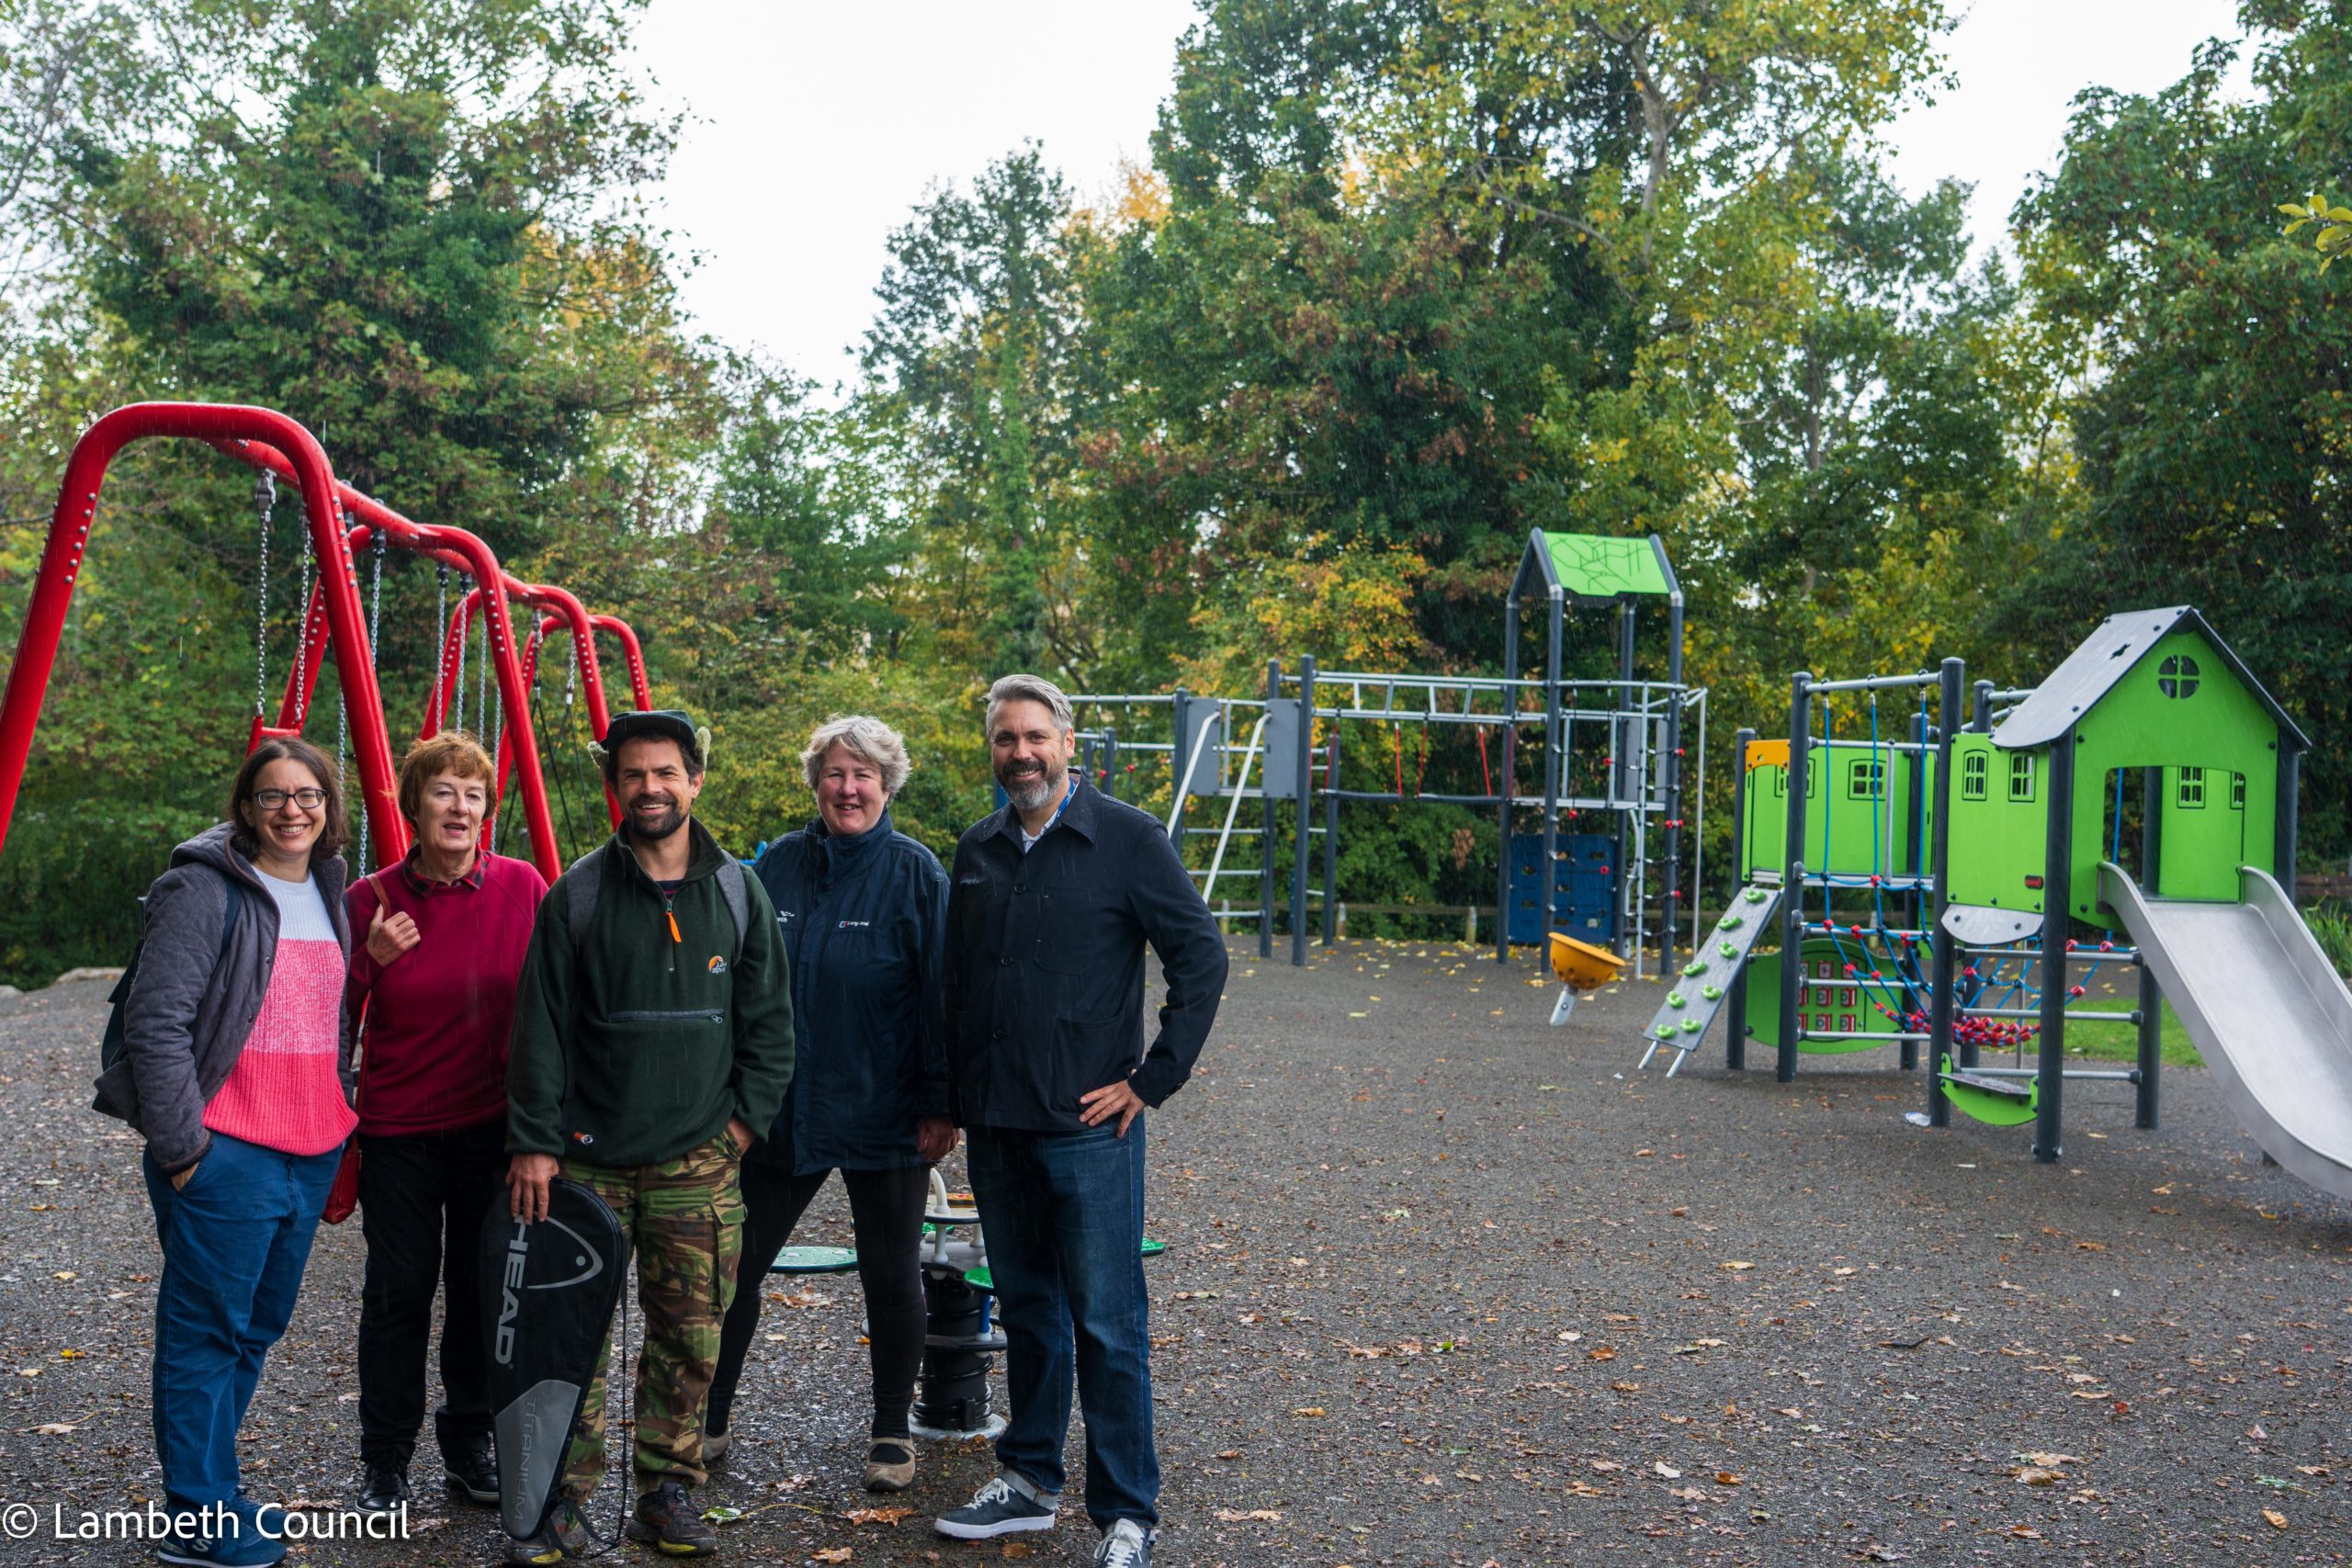 Streatham: Much loved park gets back in the swing of things